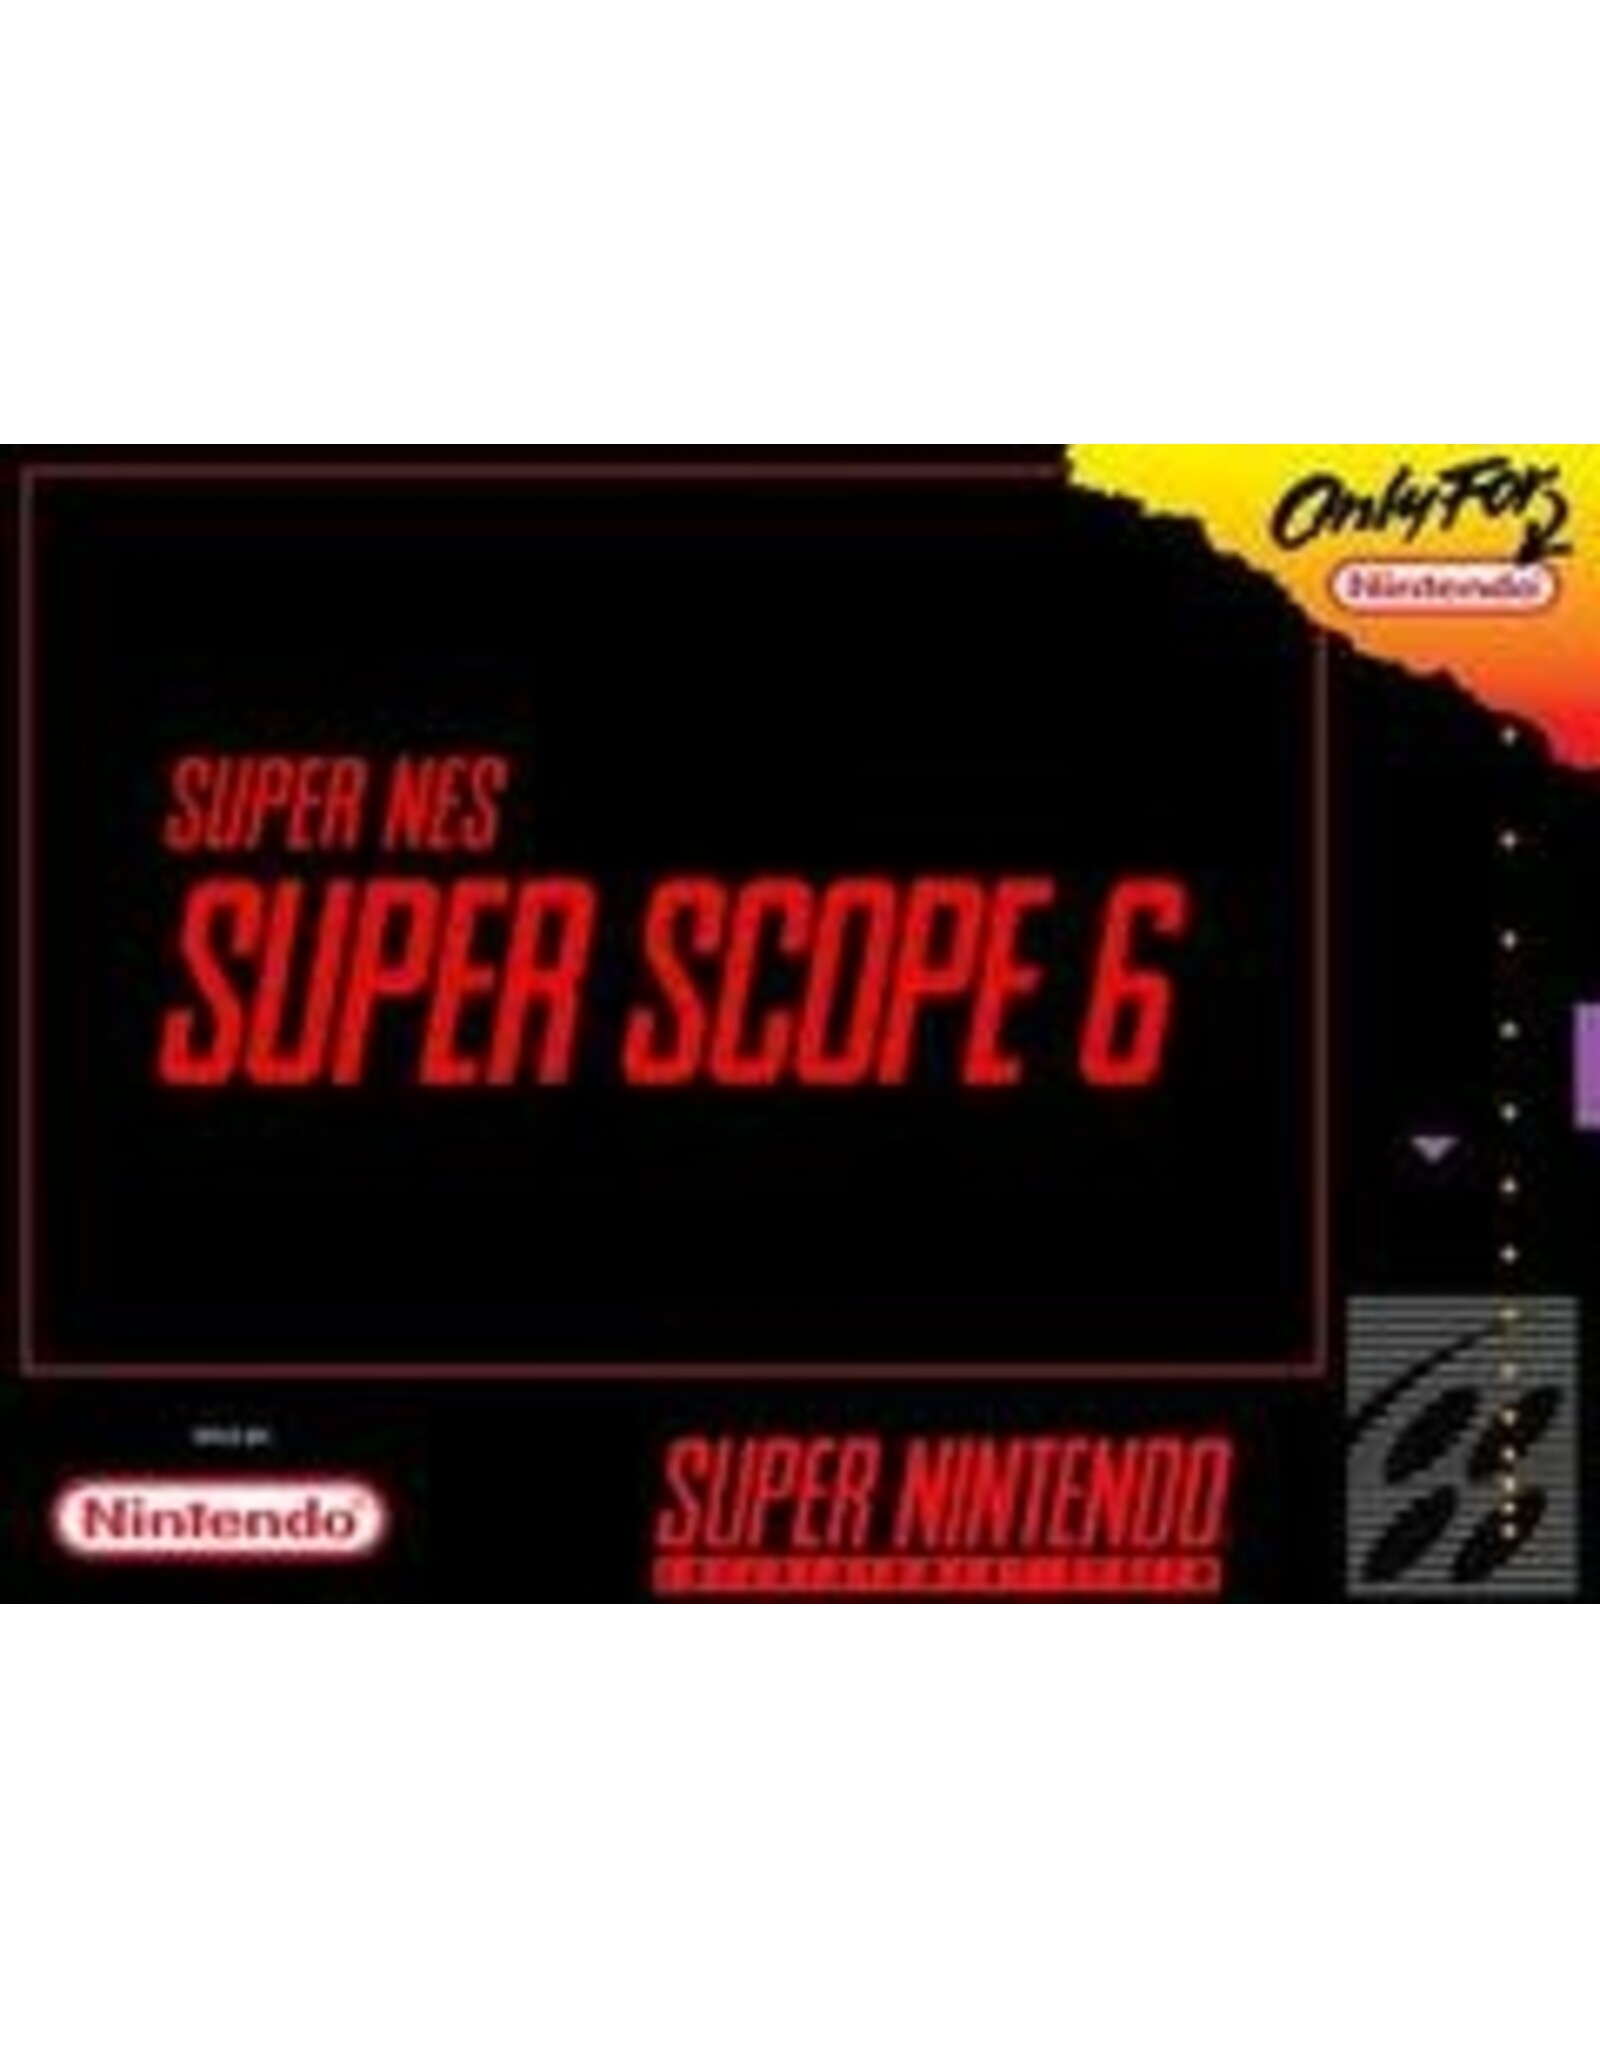 Super Nintendo Super Scope 6 (Used, Cart Only, Cosmetic Damage)